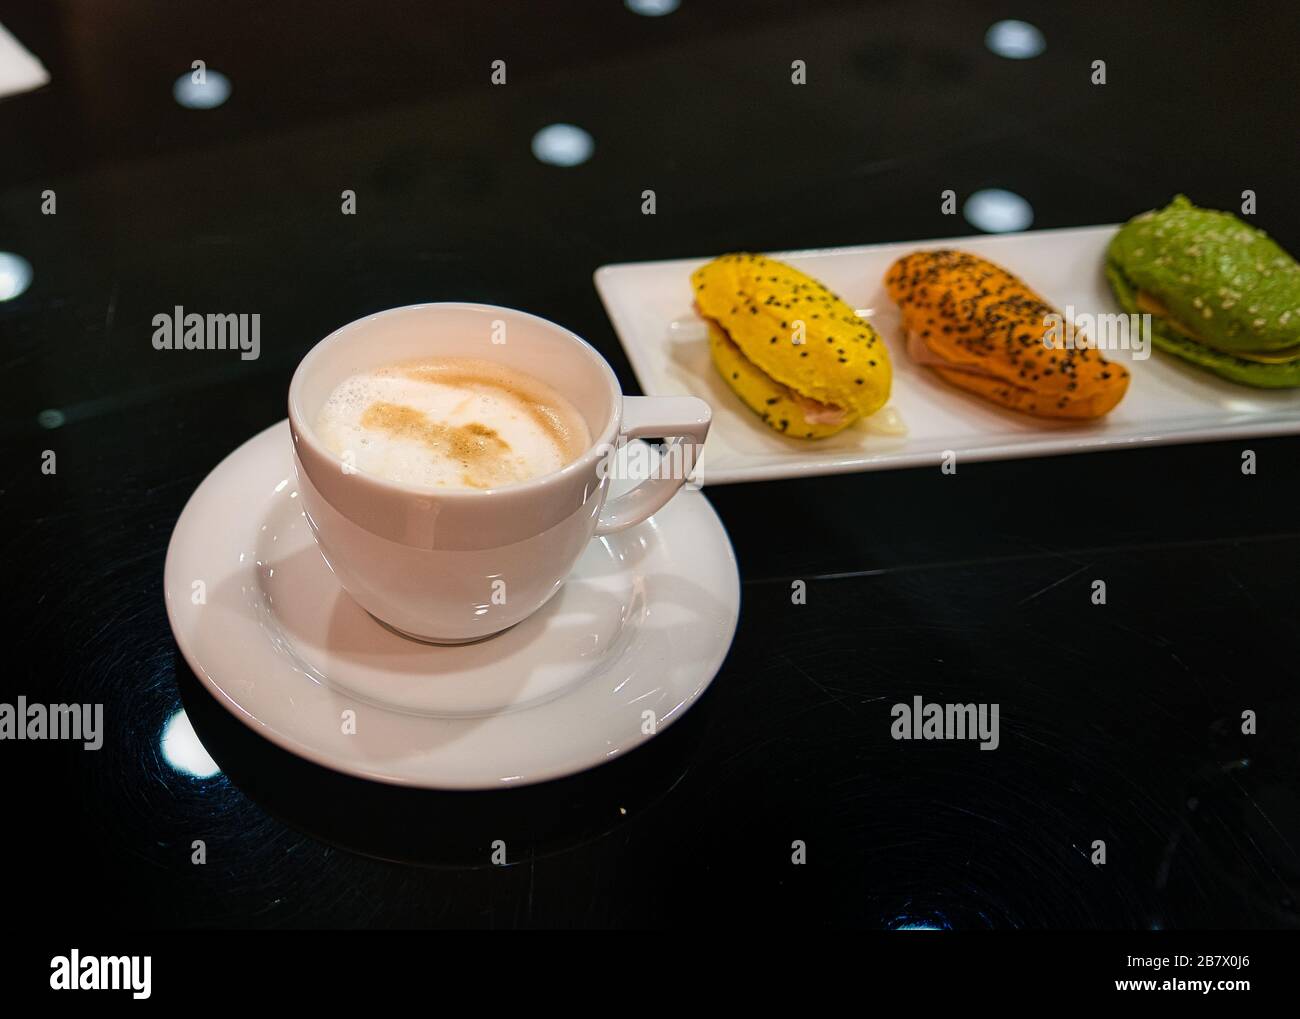 Finger food, sandwiches and a glass of champagne in an upscale atmosphere and business lounge Stock Photo